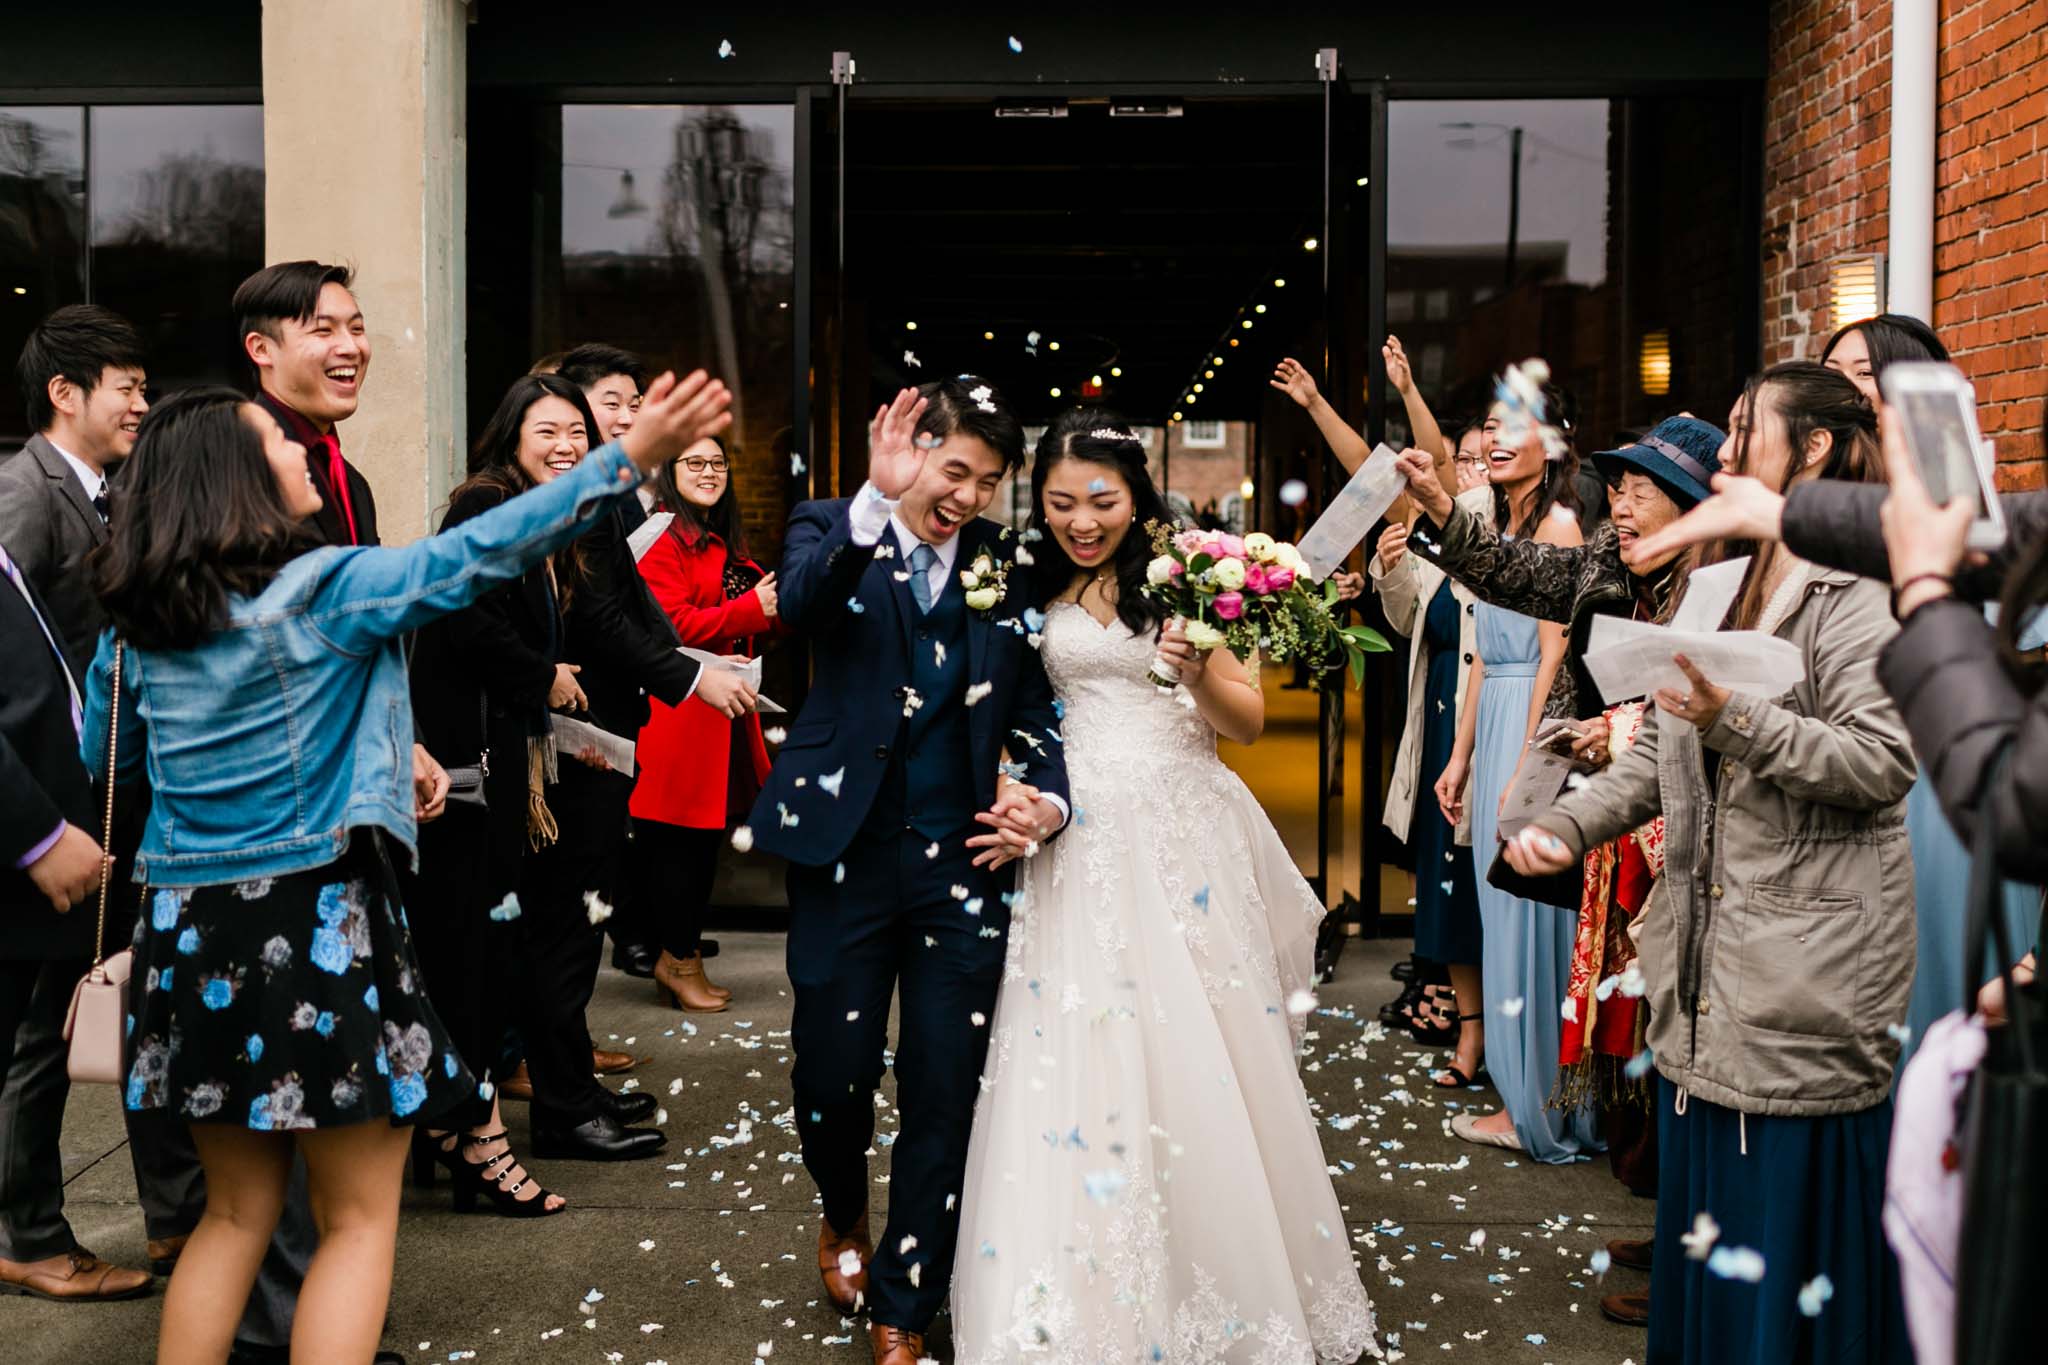 Wedding sendoff at The Cotton Room | Durham NC Photographer | By G. Lin Photography